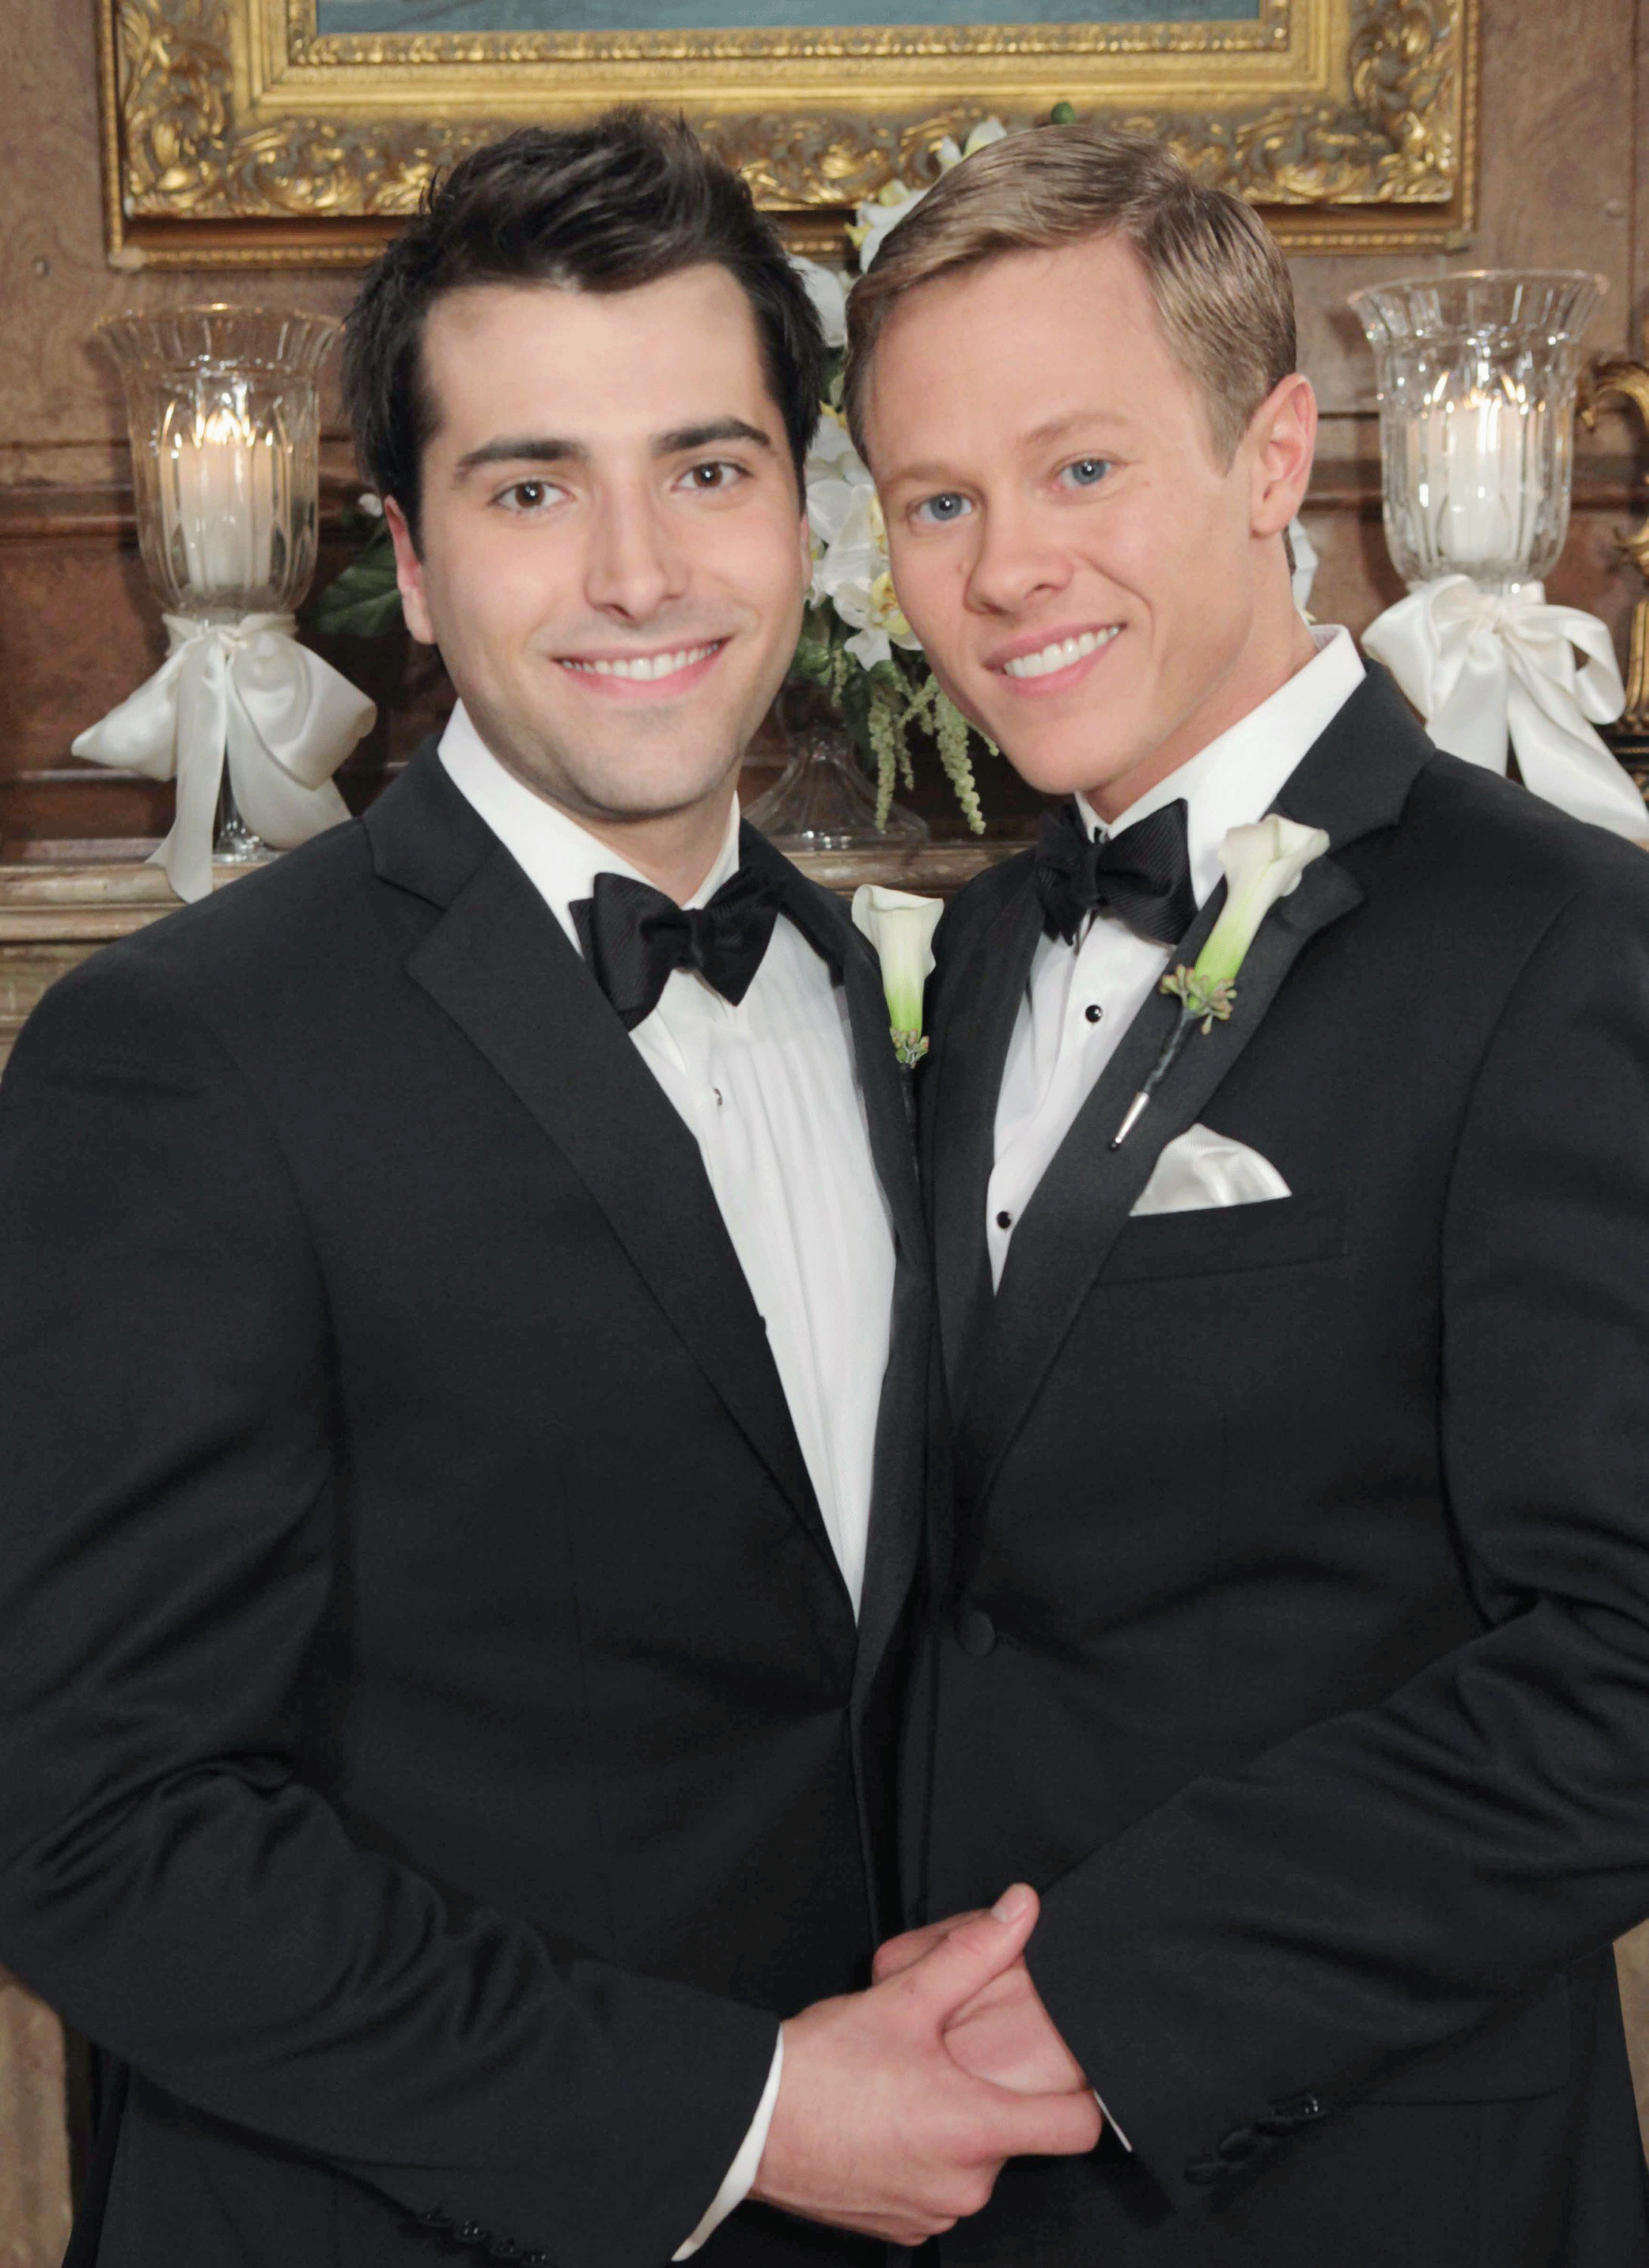 WATCH: First Gay Male Wedding in Soap Opera History
